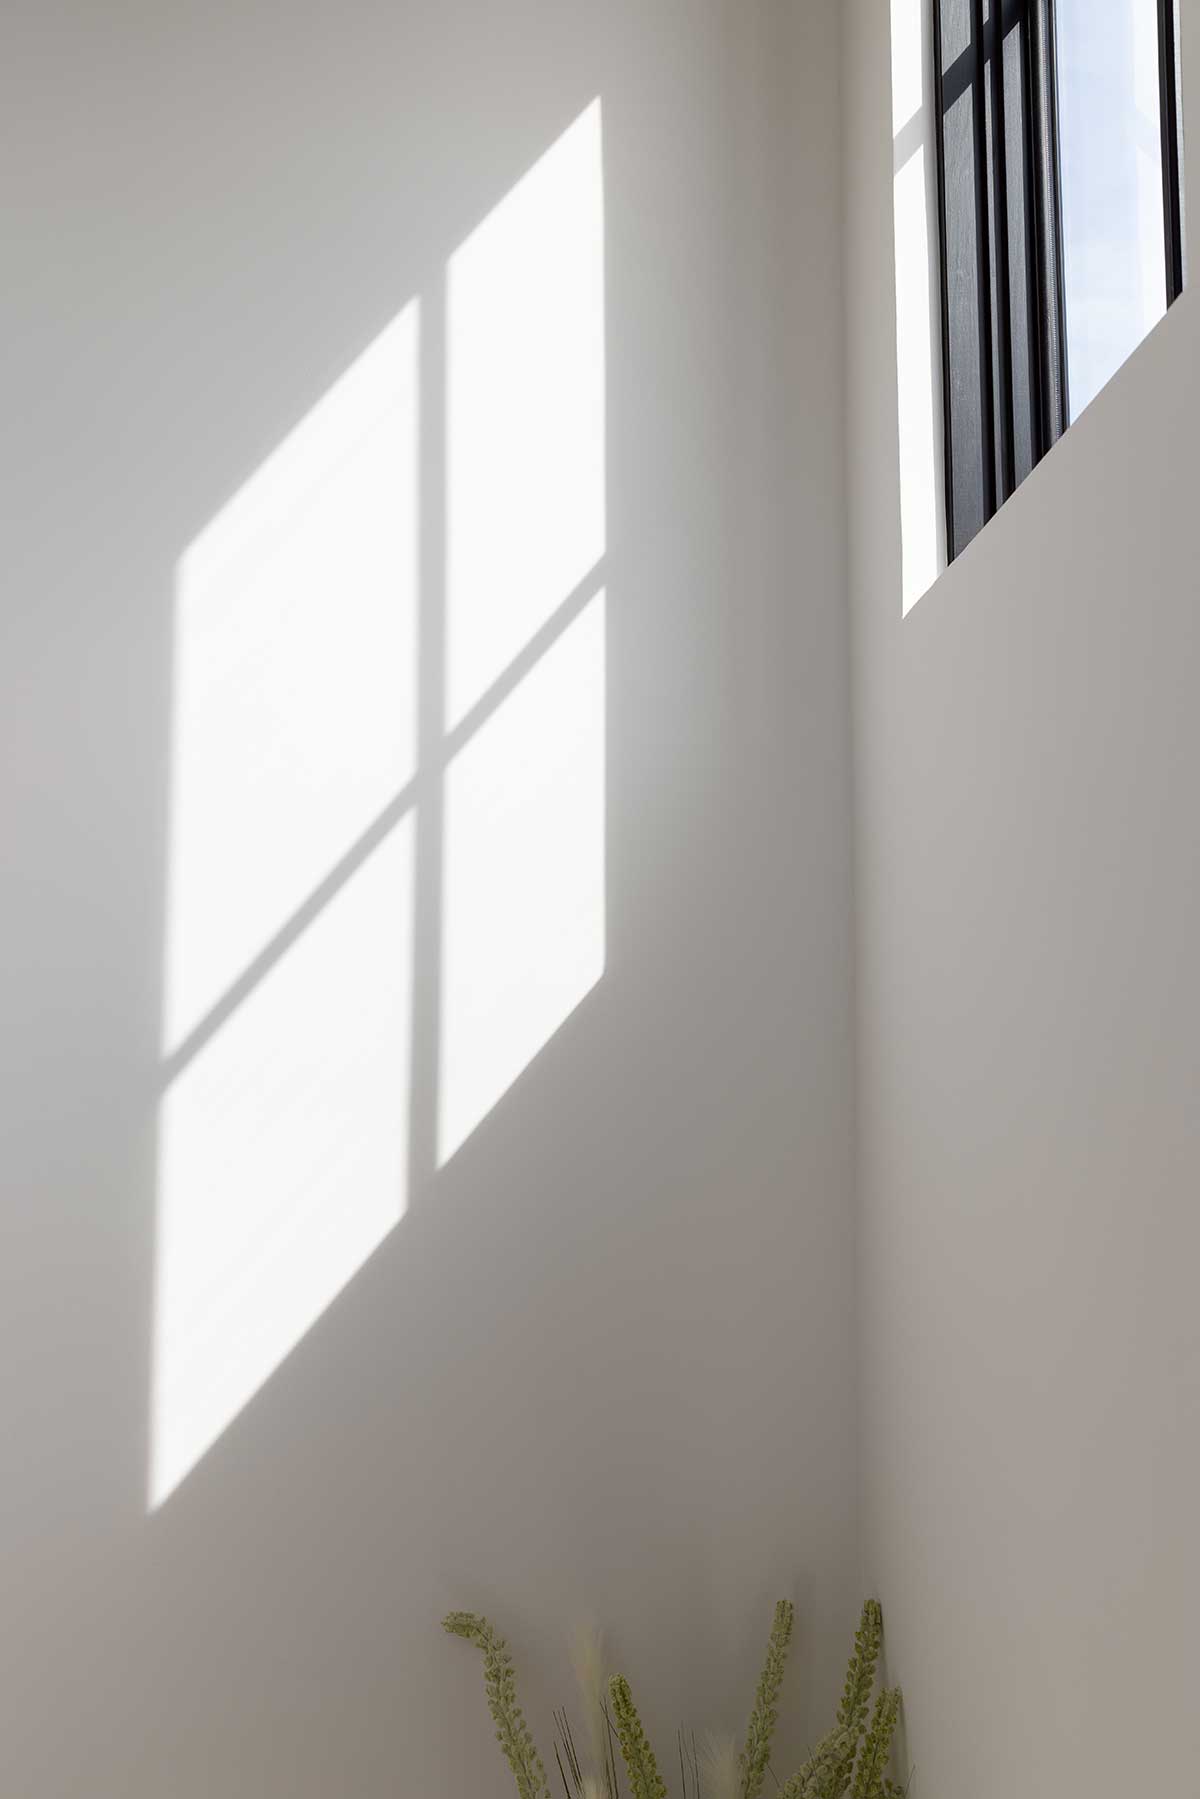 A Marvin Elevate Casement window casting a shadow on a wall.